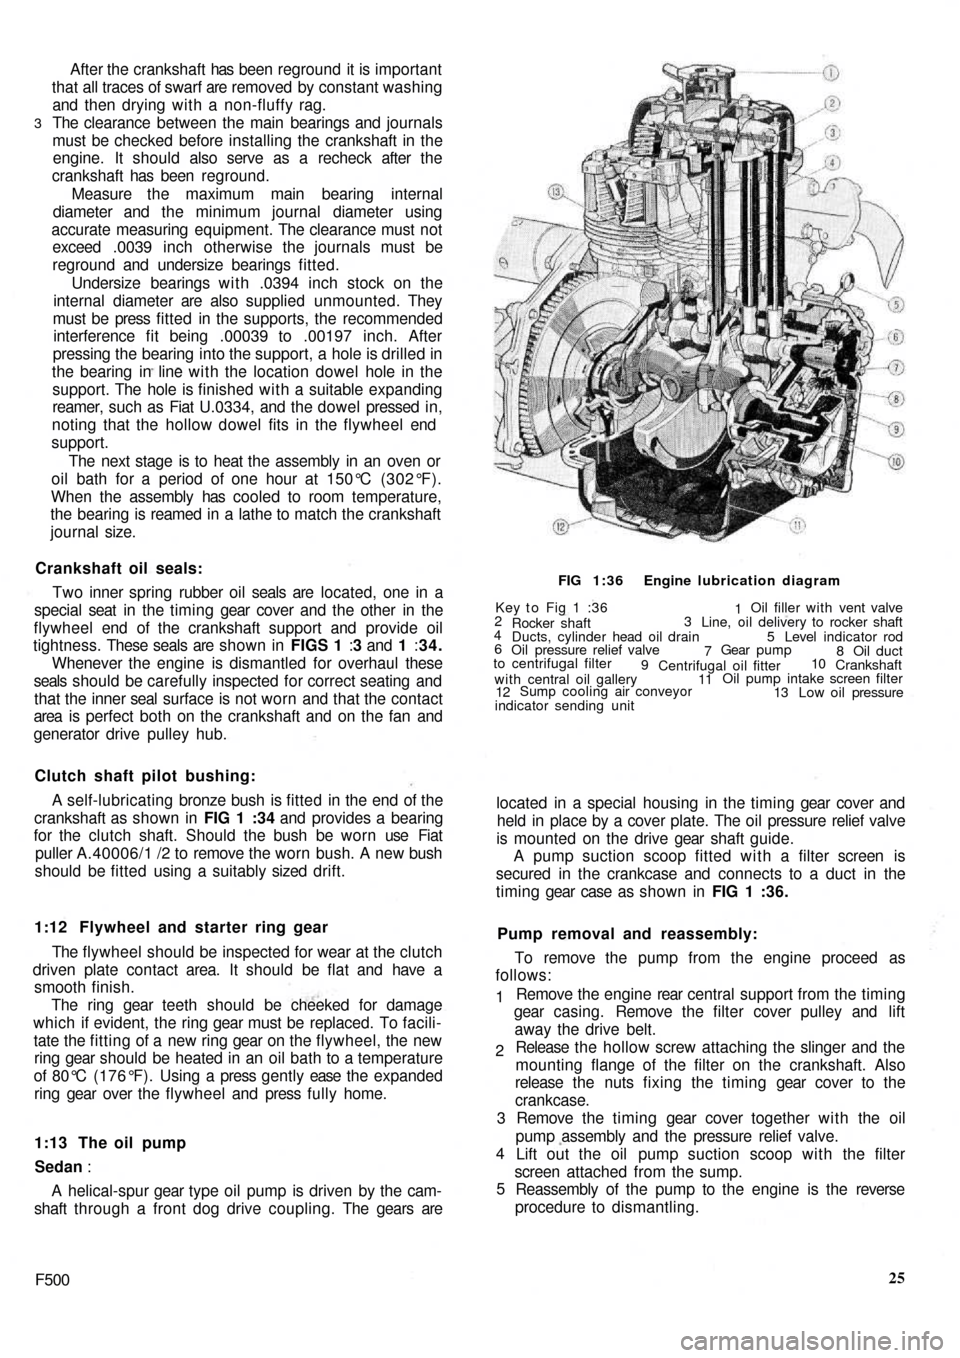 FIAT 500 1967 1.G Workshop Manual After the  crankshaft  has been reground  it is important
that all traces of swarf are removed  by constant washing
and then drying with a non-fluffy rag.
The clearance between the main bearings and j